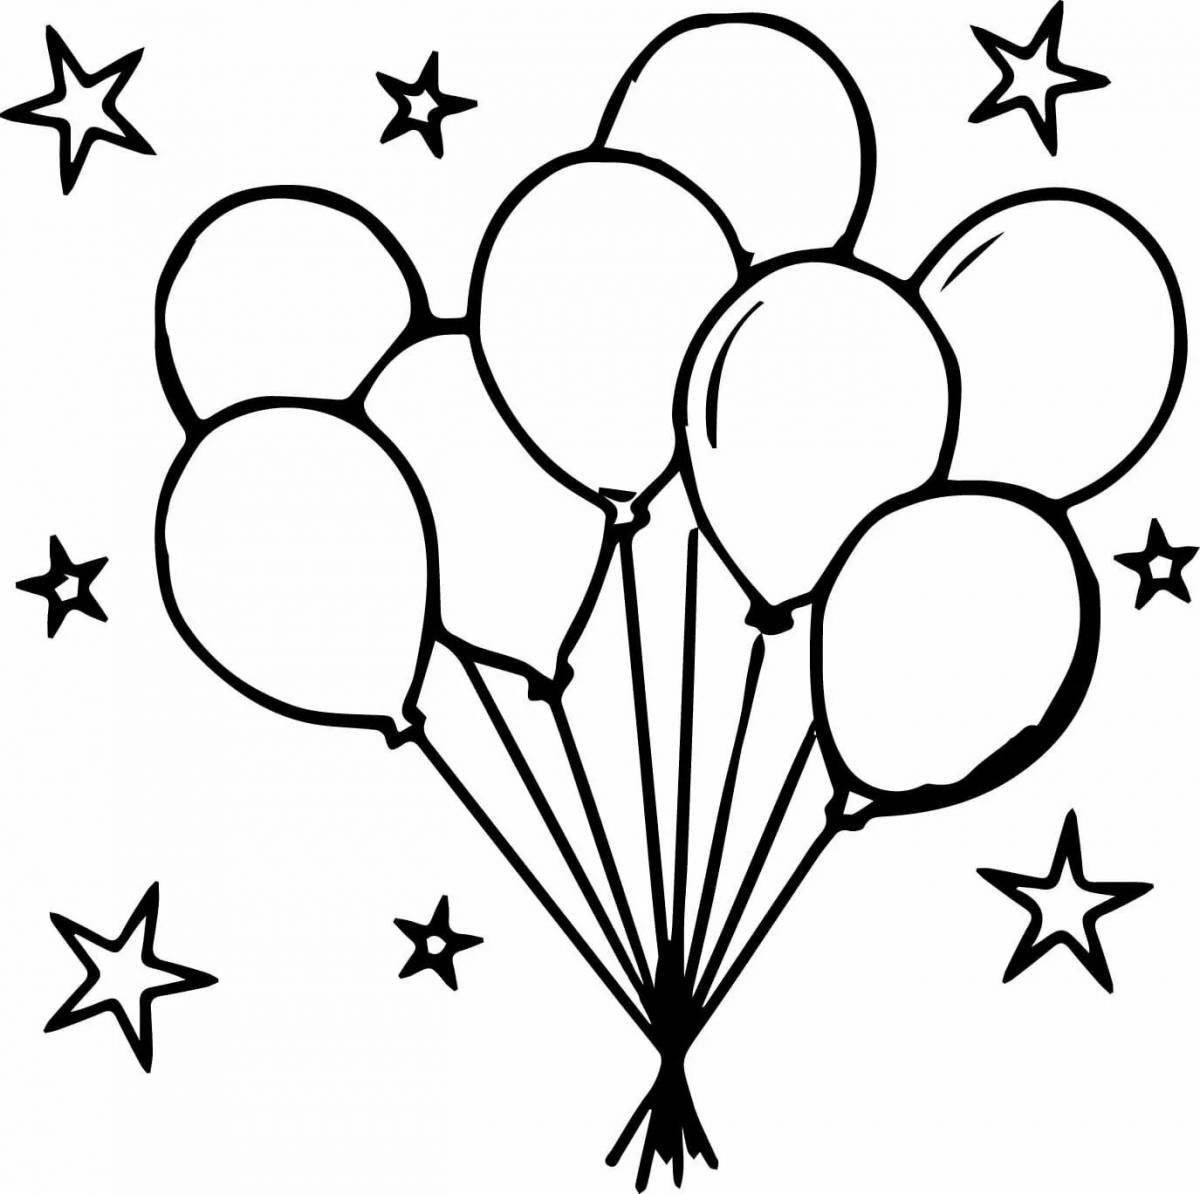 Coloring page fluffy bunch of balloons